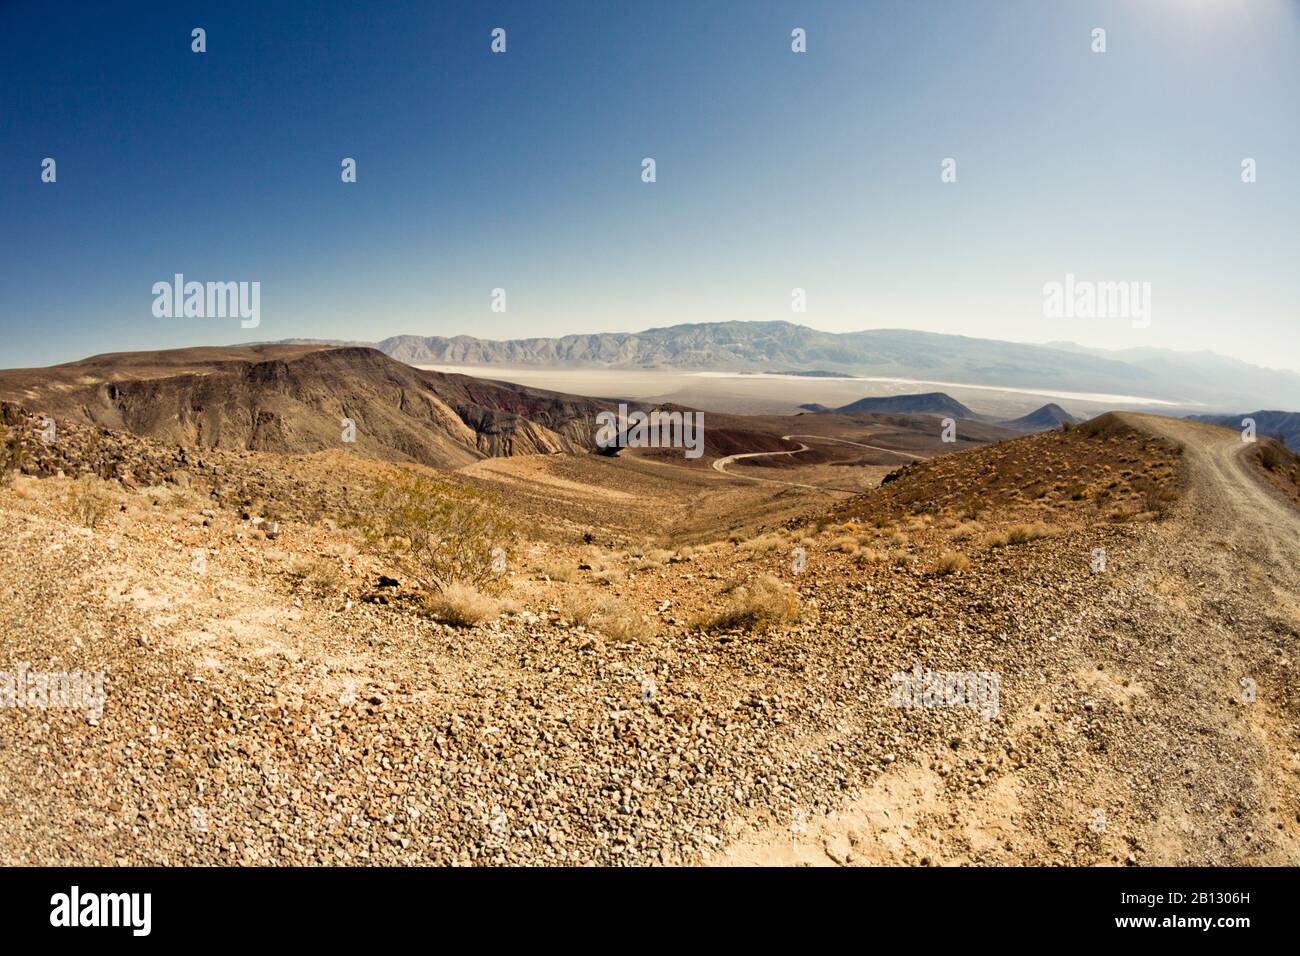 View from California to Death Valley at scorching midday heat,Nevada,USA Stock Photo